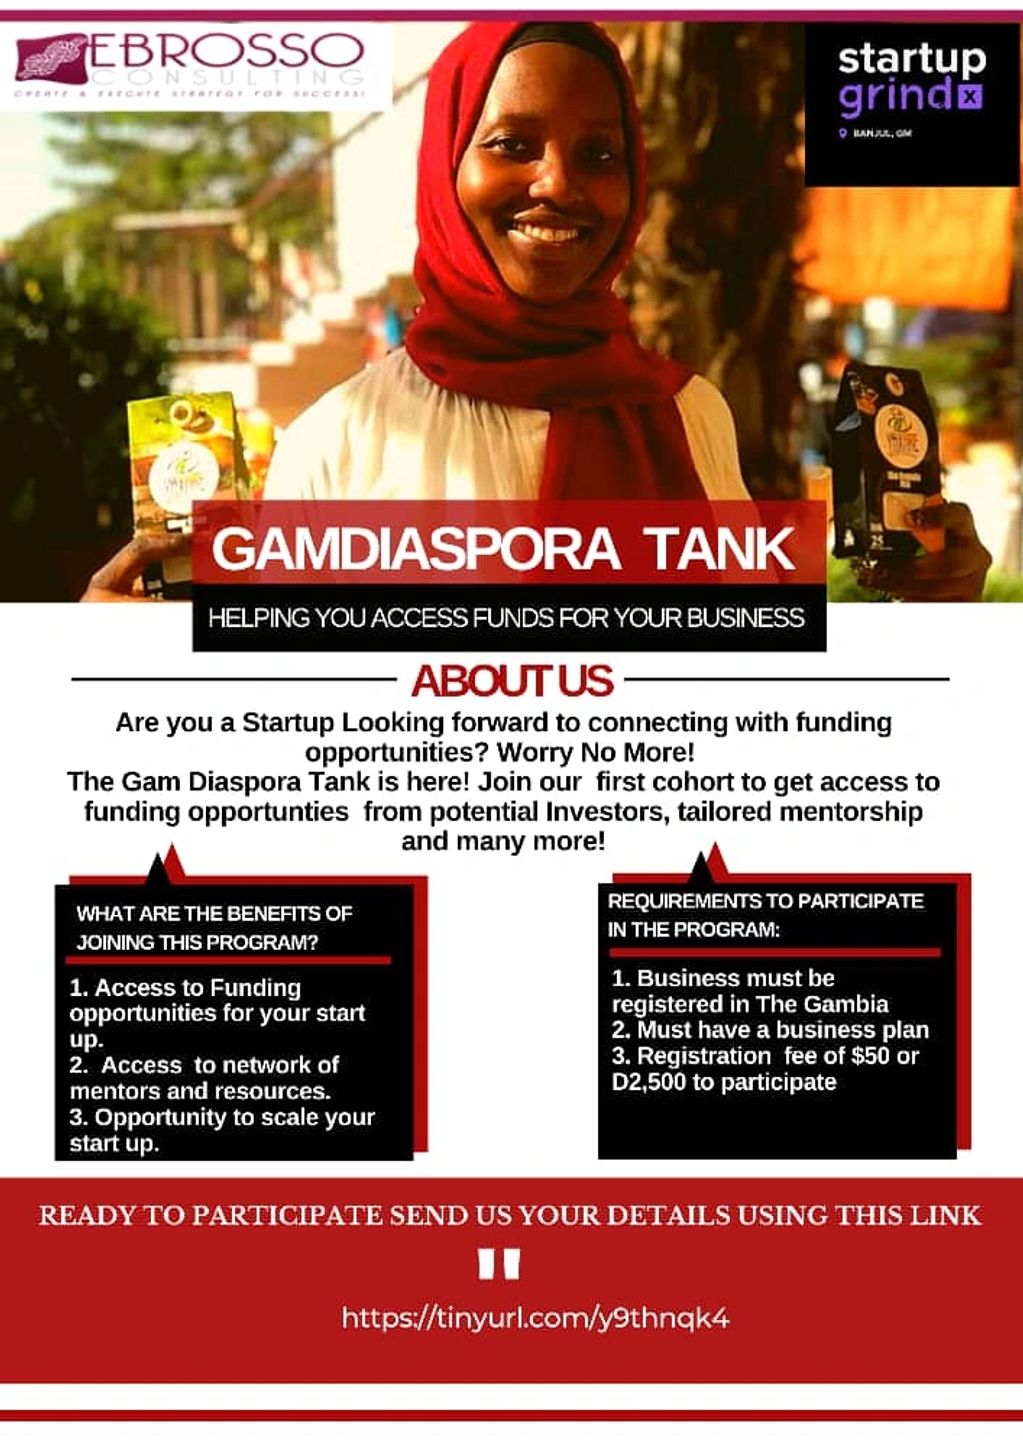 GAMDIASPORA TANK is  Startup fund to support  Entrepreneurs in  Gambia,  to access seed funding. 
